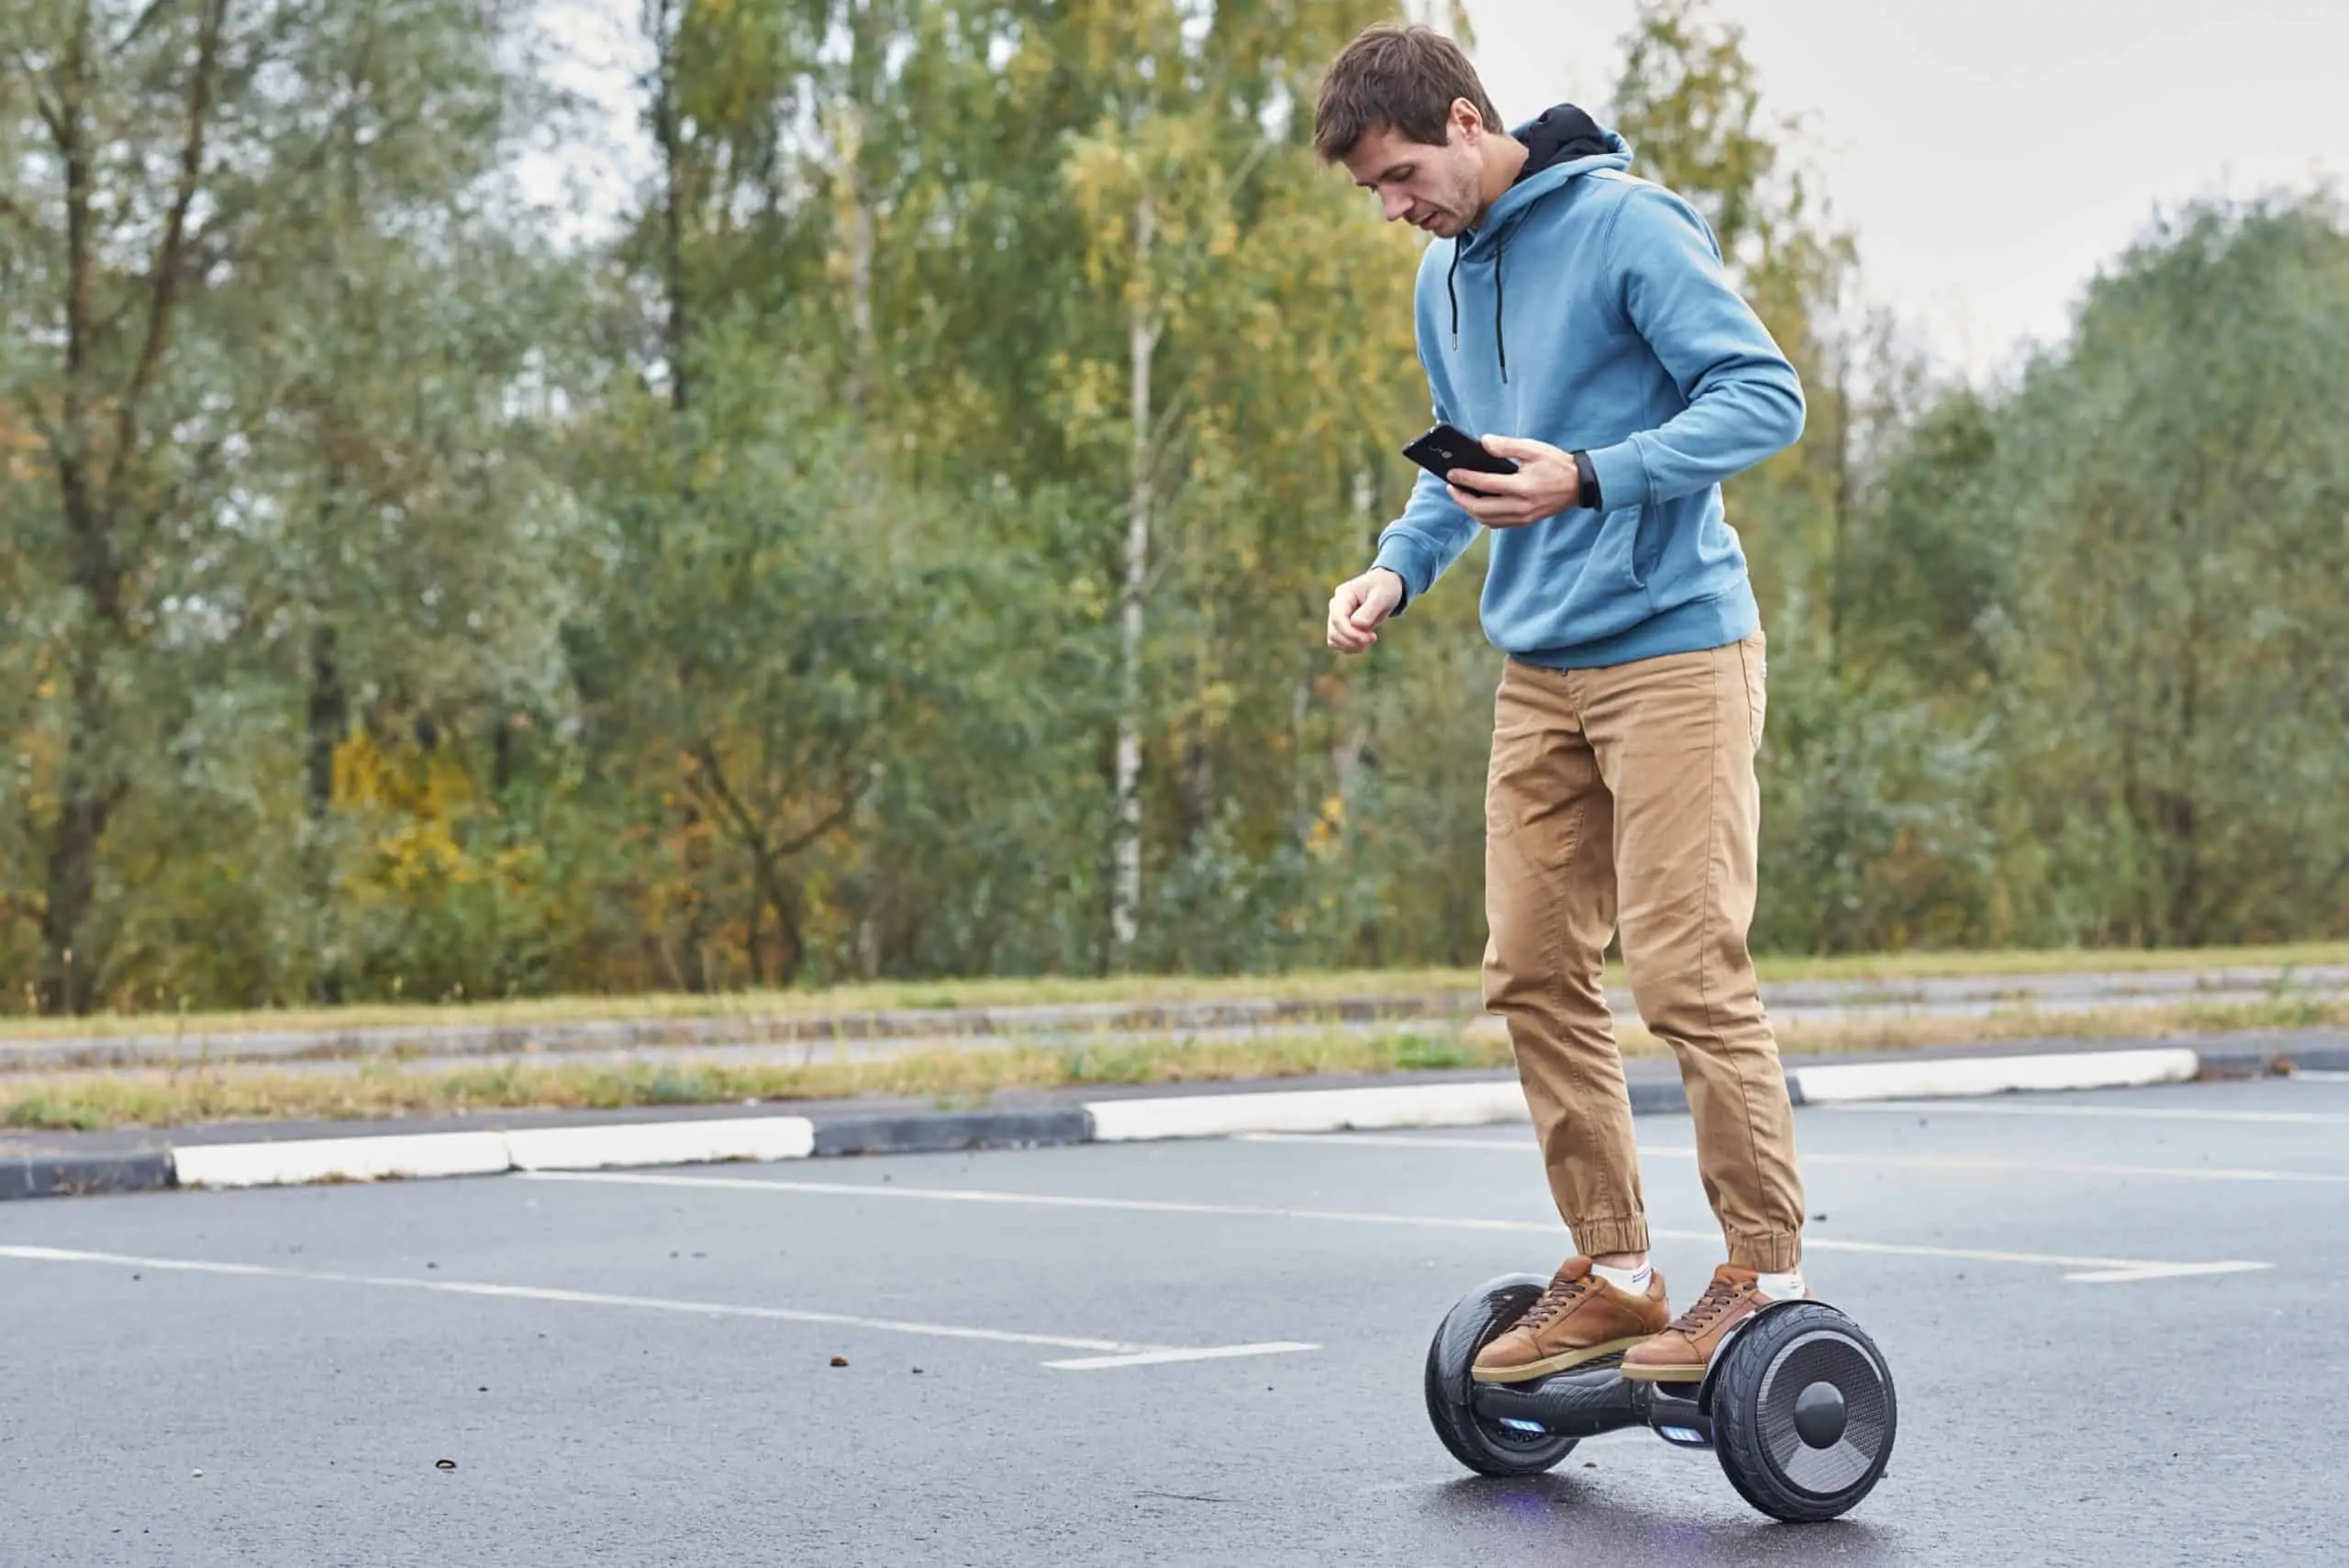 How Fast Does a Hoverboard Go? Expectations Vs. Reality